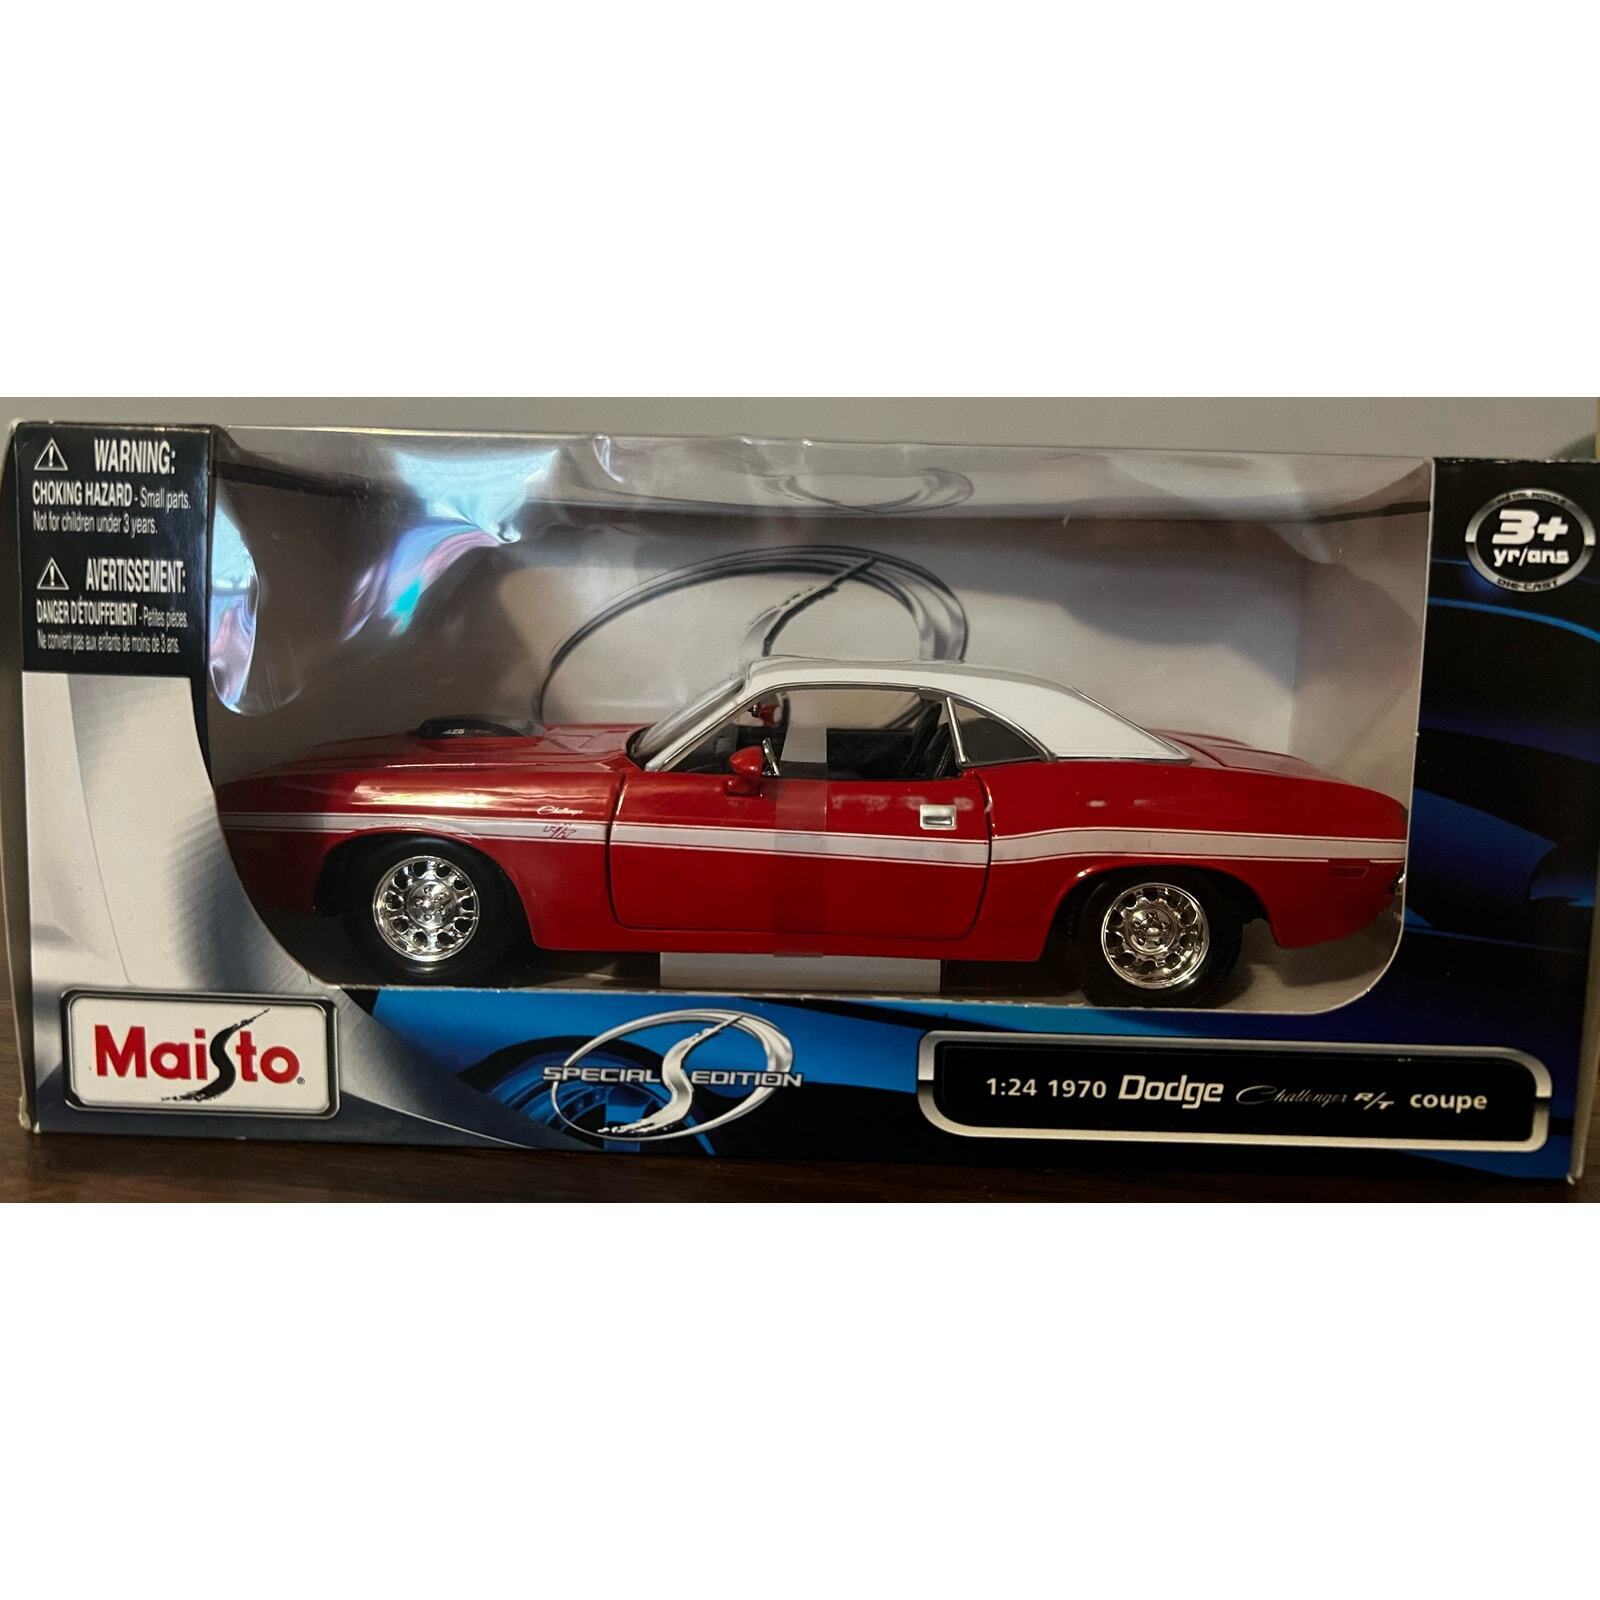 1:24 Maisto Special Edition  1970 Dodge Challenger Coupe NEW in box die cast